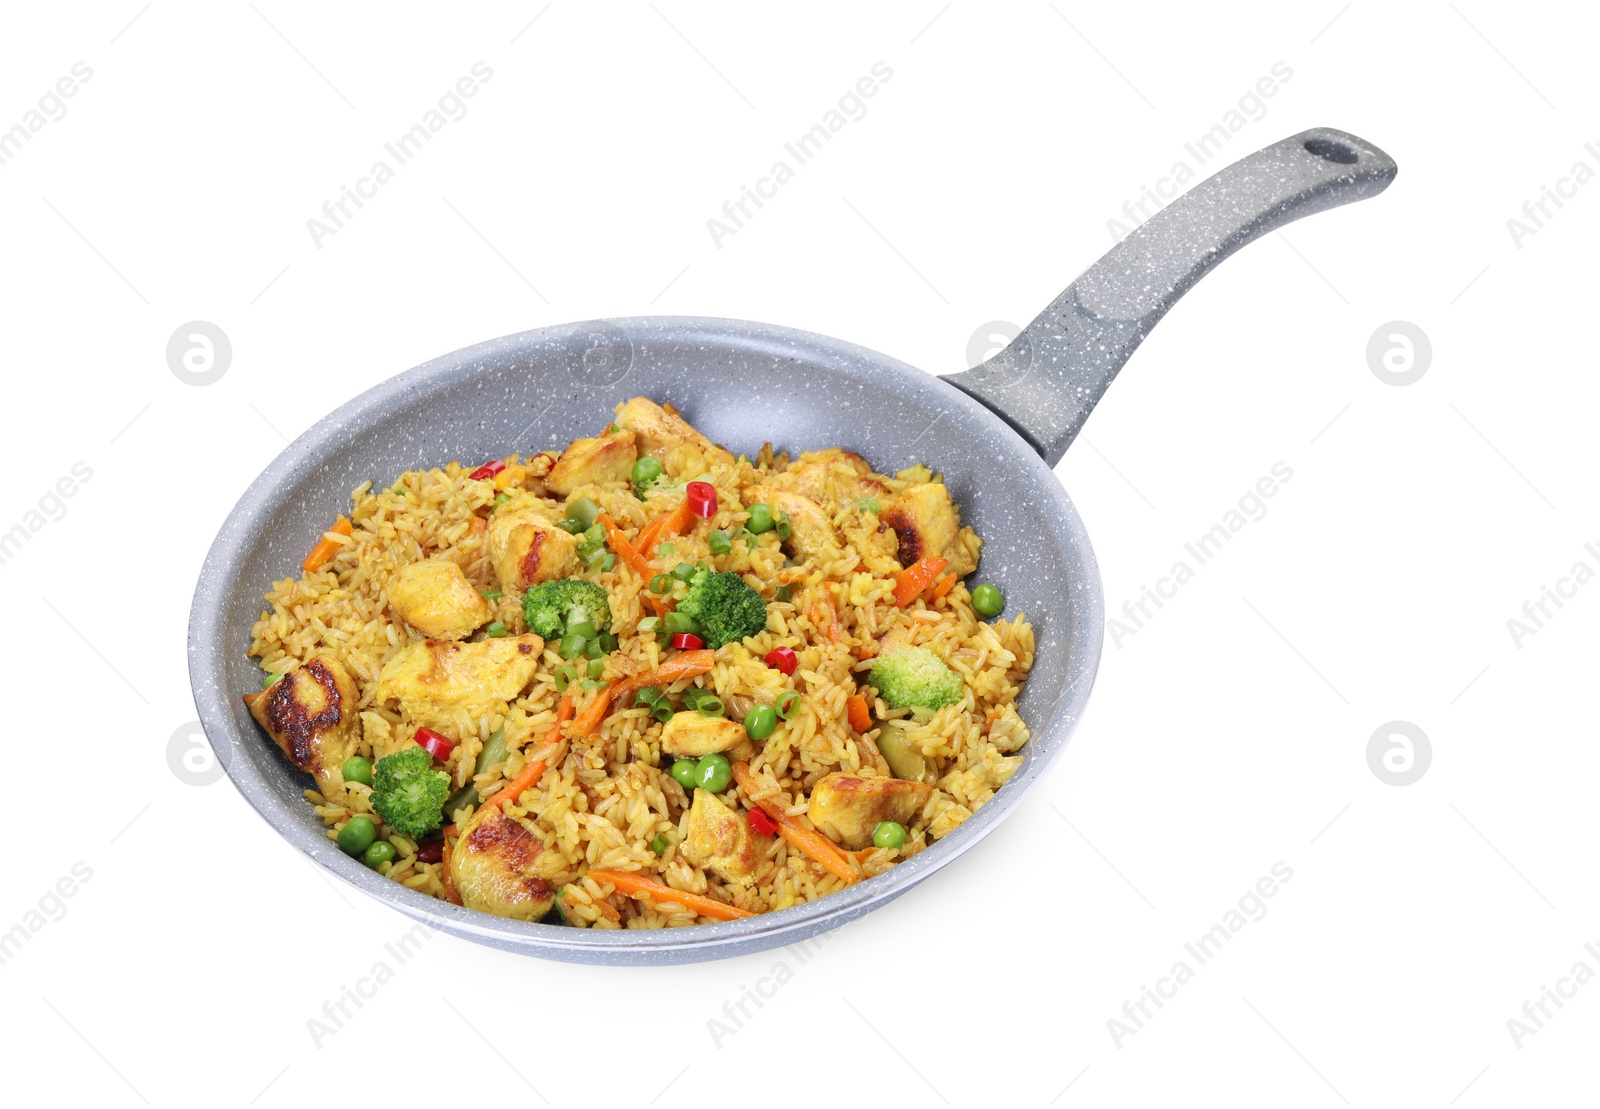 Photo of Tasty rice with meat and vegetables in frying pan isolated on white